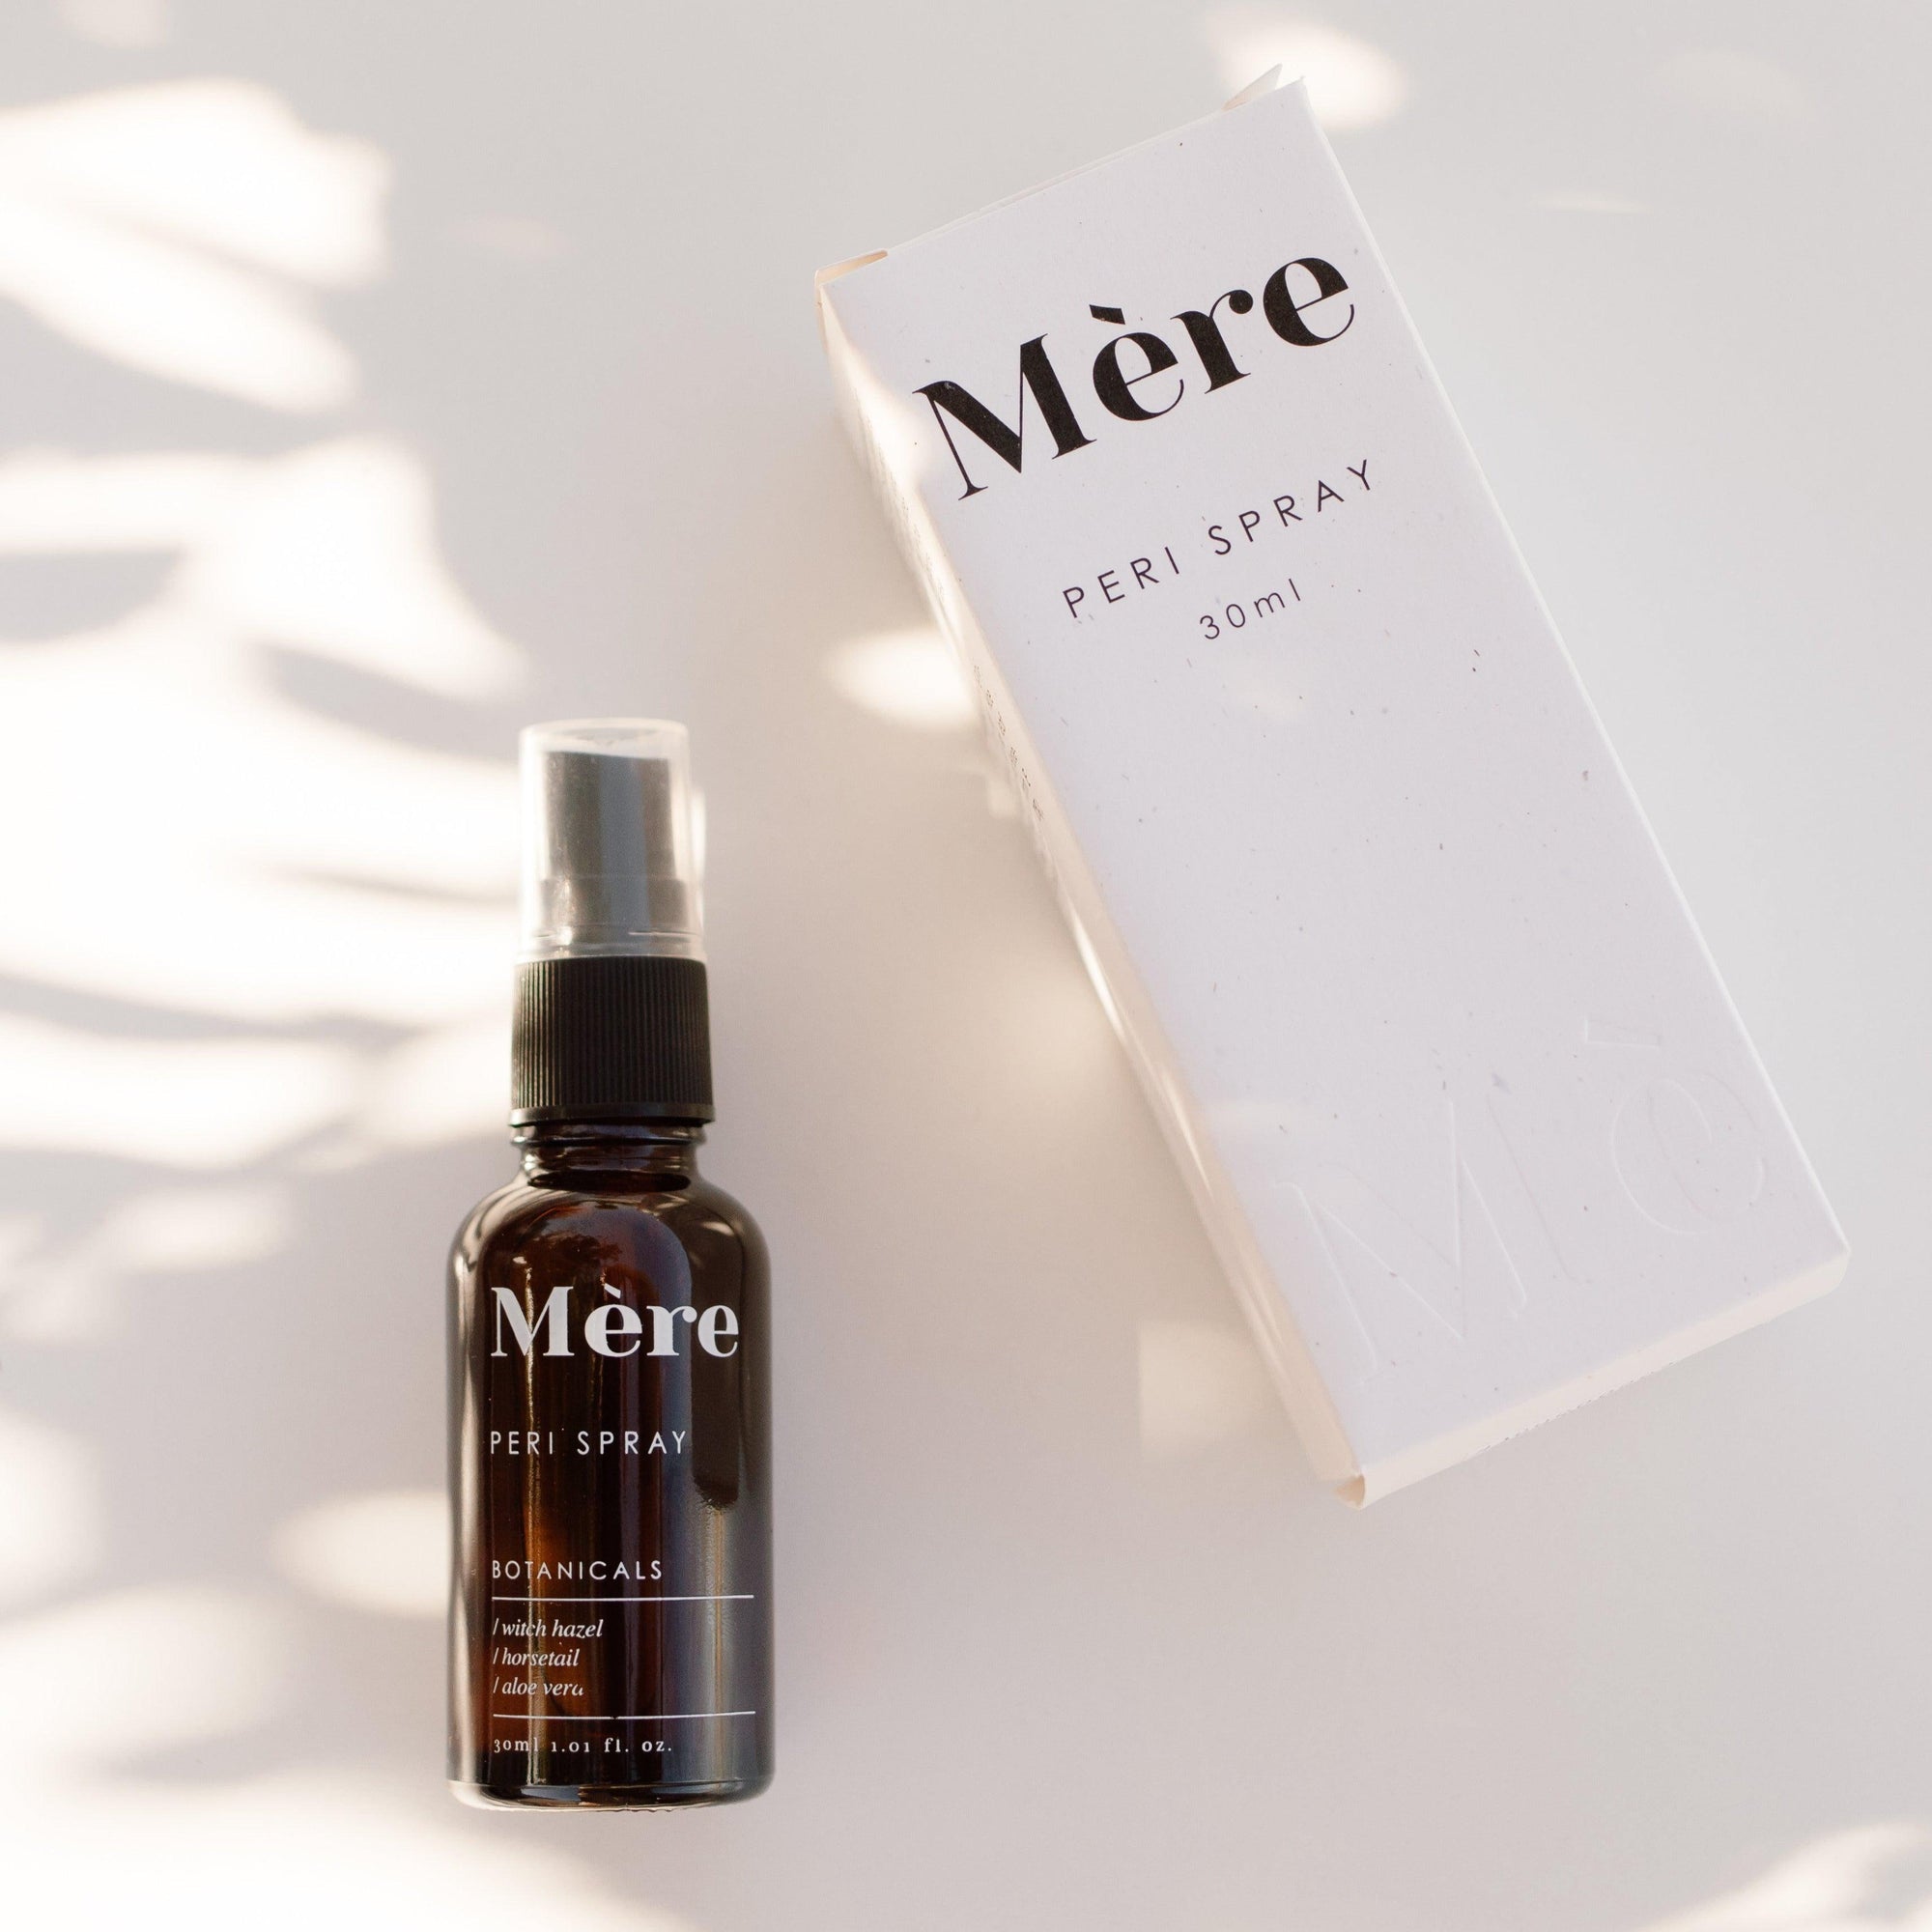 An image of Mere Healing Peri Spray next to the box.